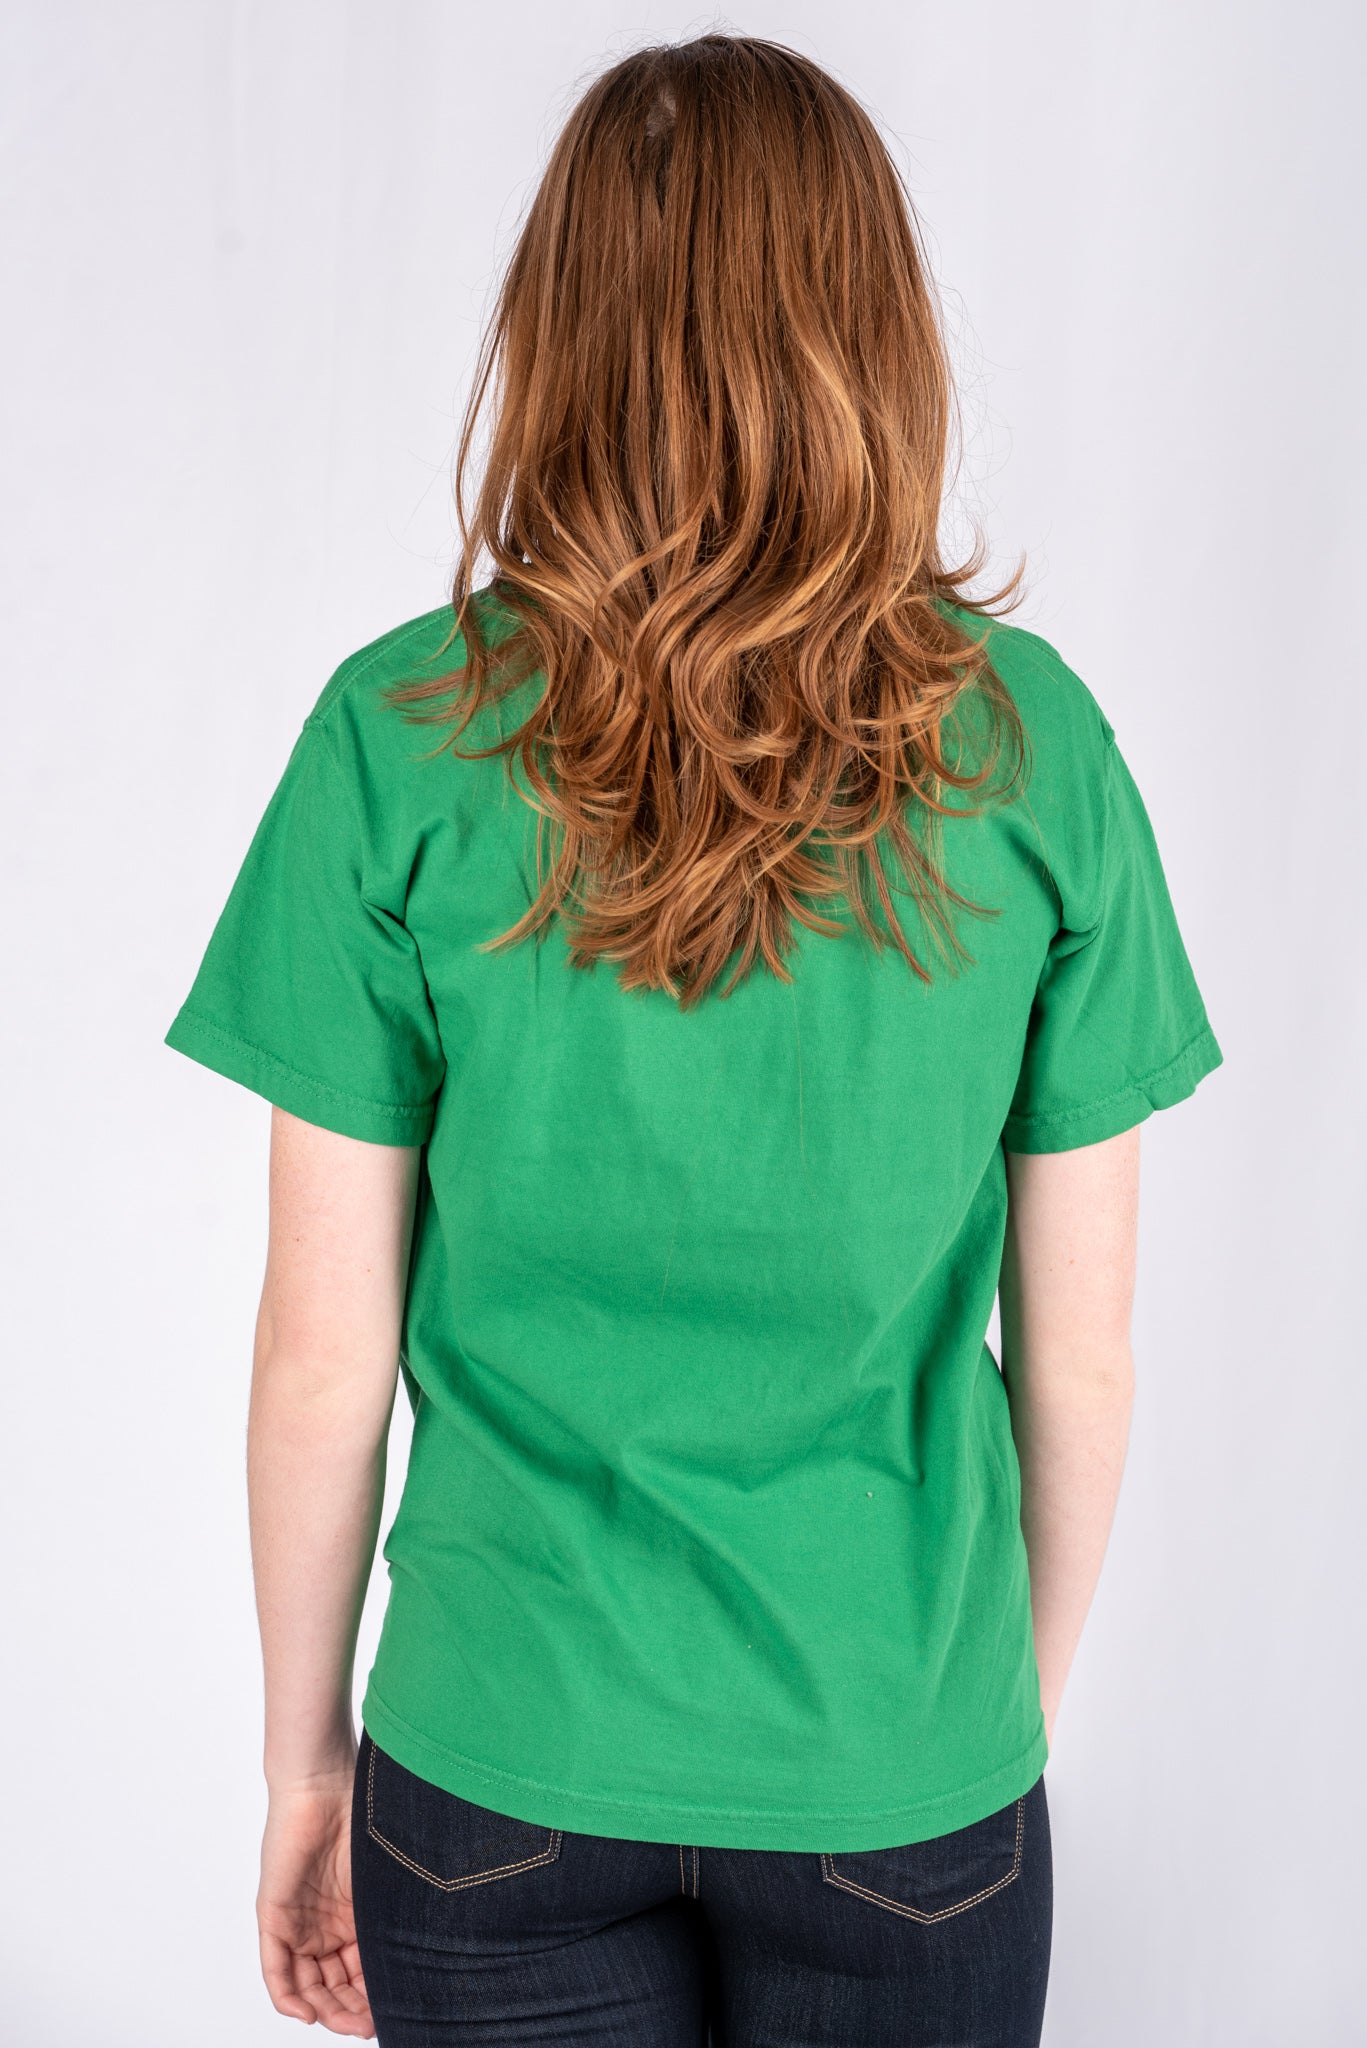 Oklahoma Simply Clover Comfort Color Green T-shirt - Affordable T-shirts - Boutique Graphic T-Shirts at Lush Fashion Lounge Boutique in Oklahoma City